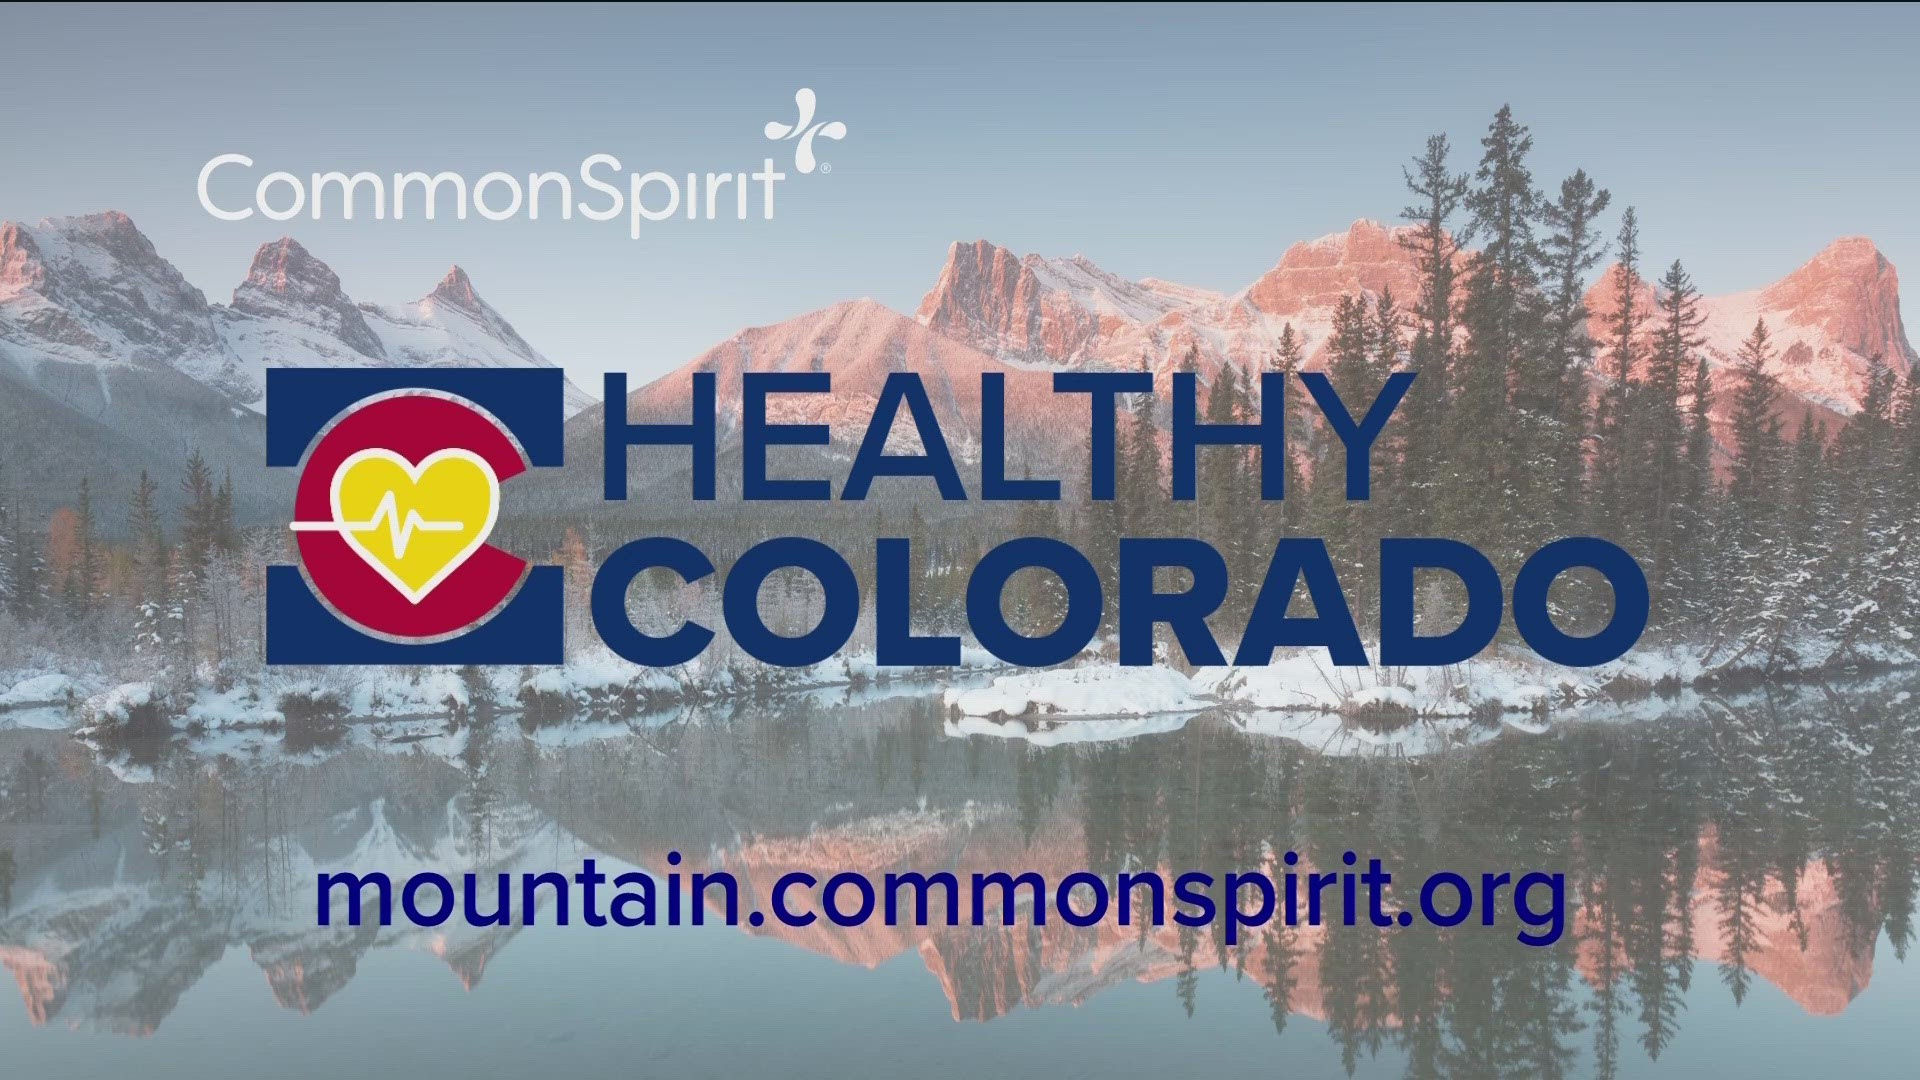 Human Kindness is what CommonSpirit is all about. Visit Mountain.CommonSpirit.org to learn more.